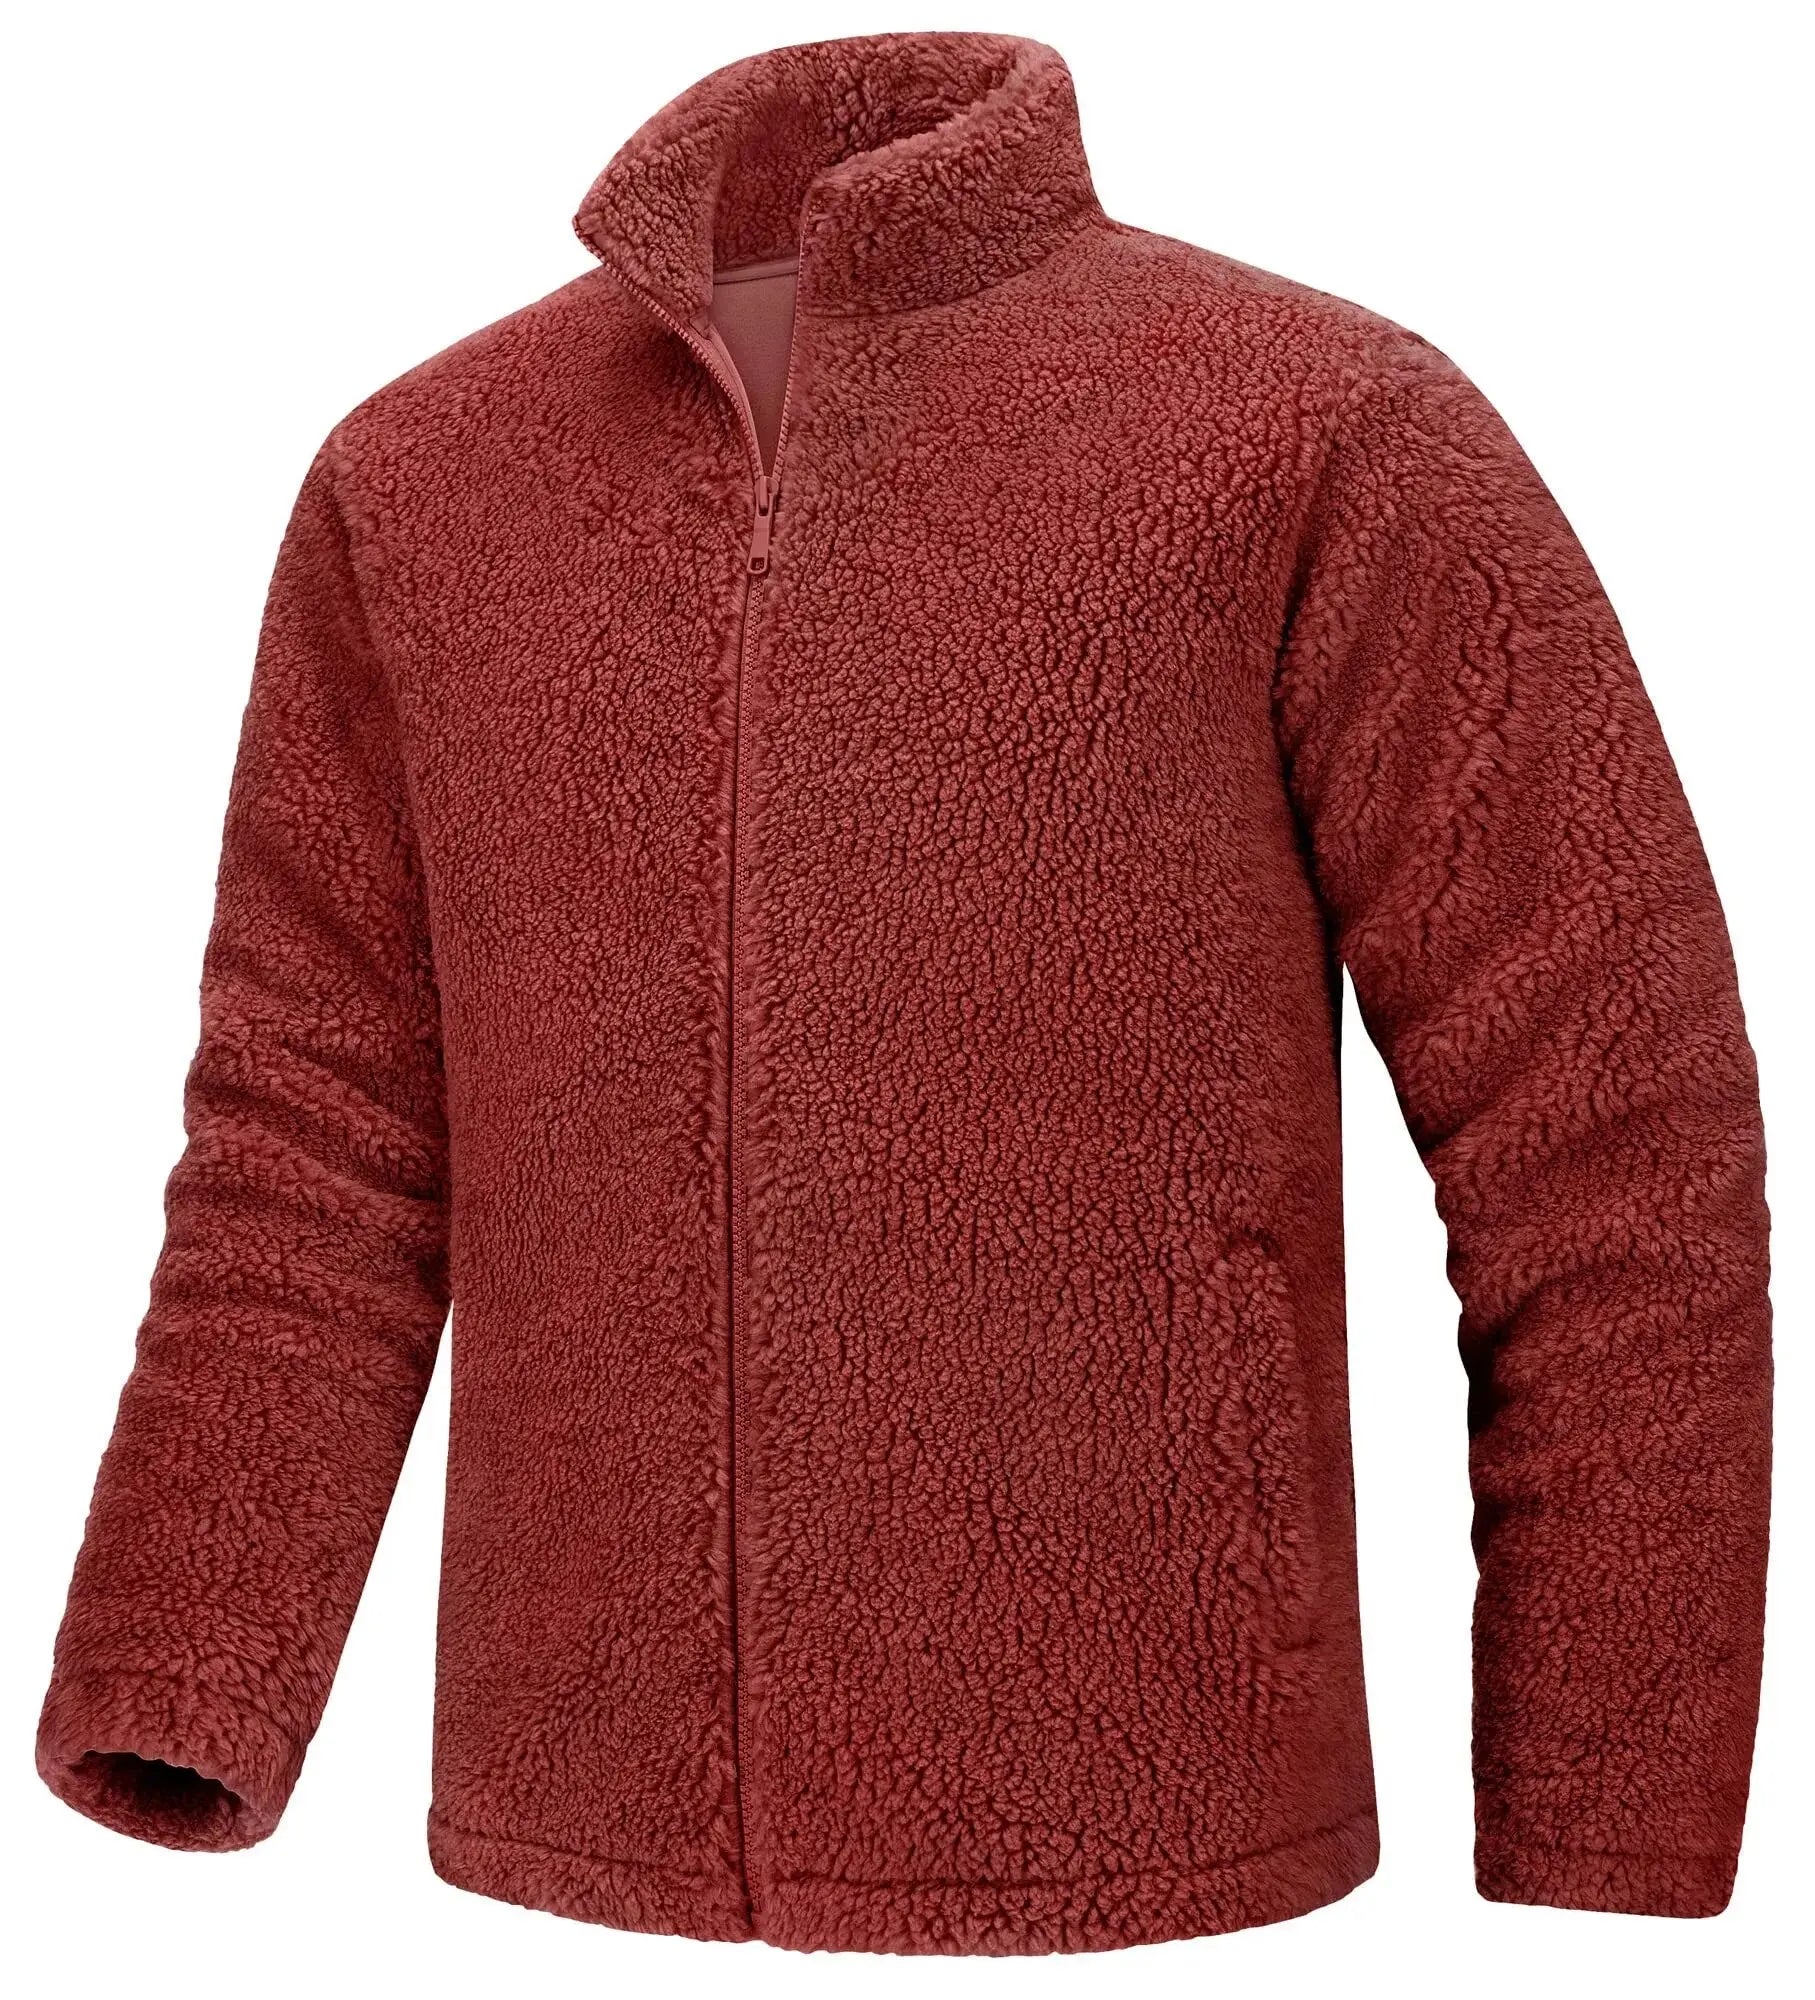 Snug Sherpa-Lined Winter Coat with Zippered Pockets Liograft